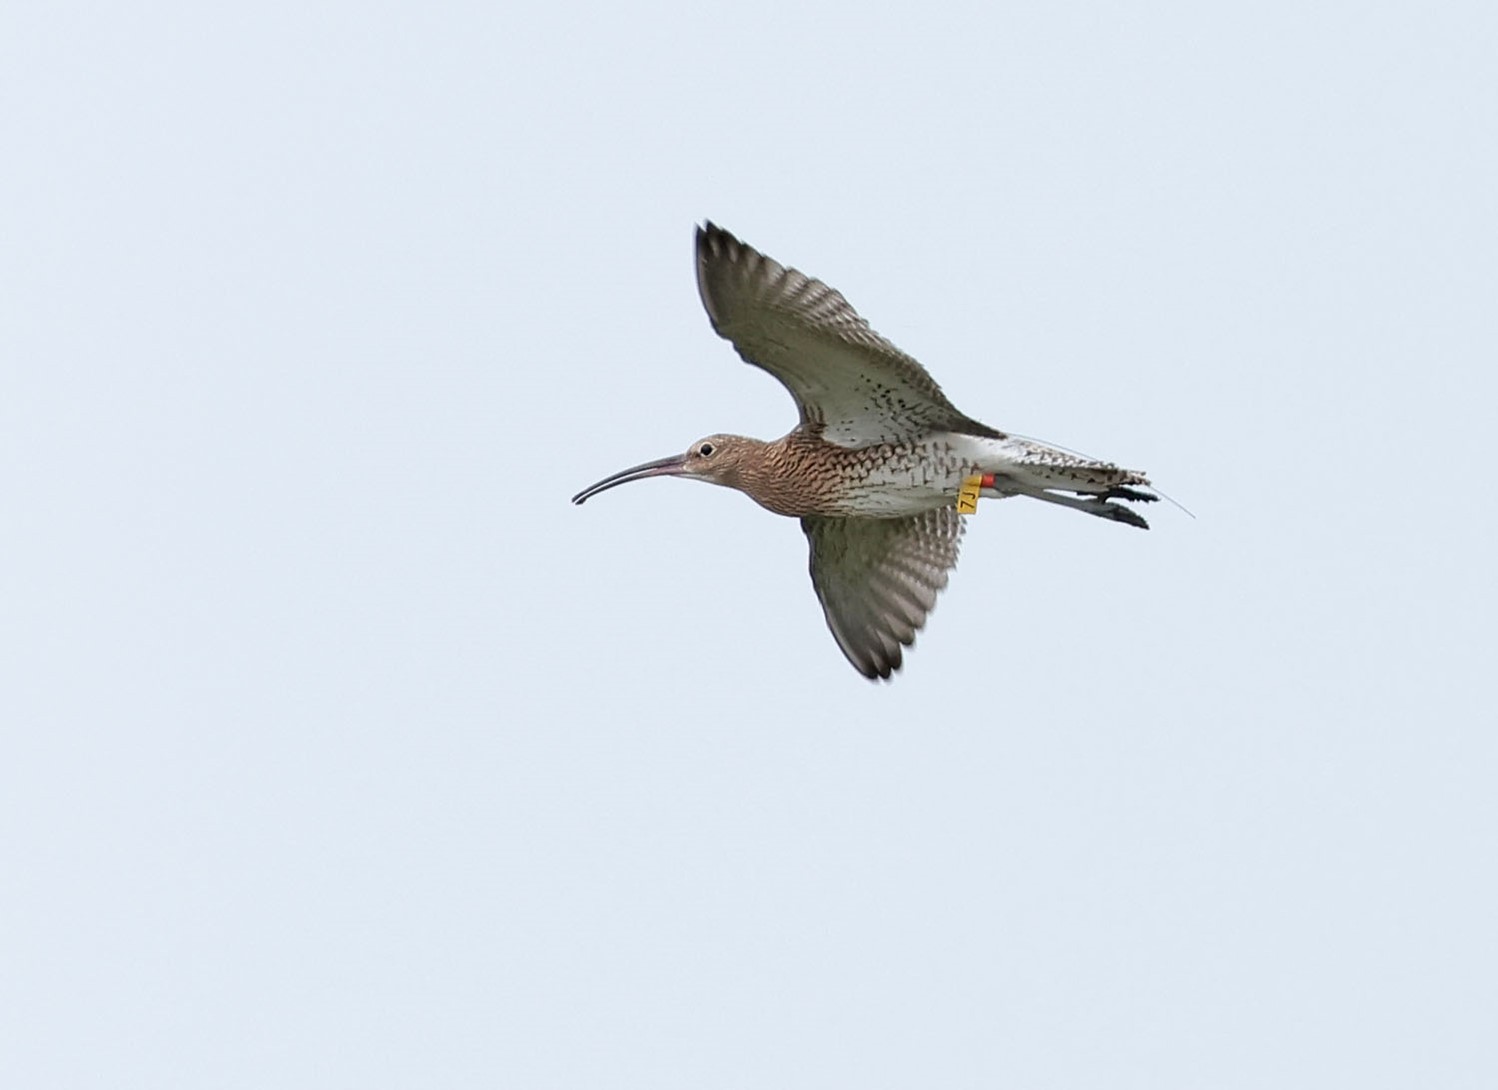 Image shows a Eurasian Curlew, a small brown bird with a distinctively long beak thin beak, in flight.